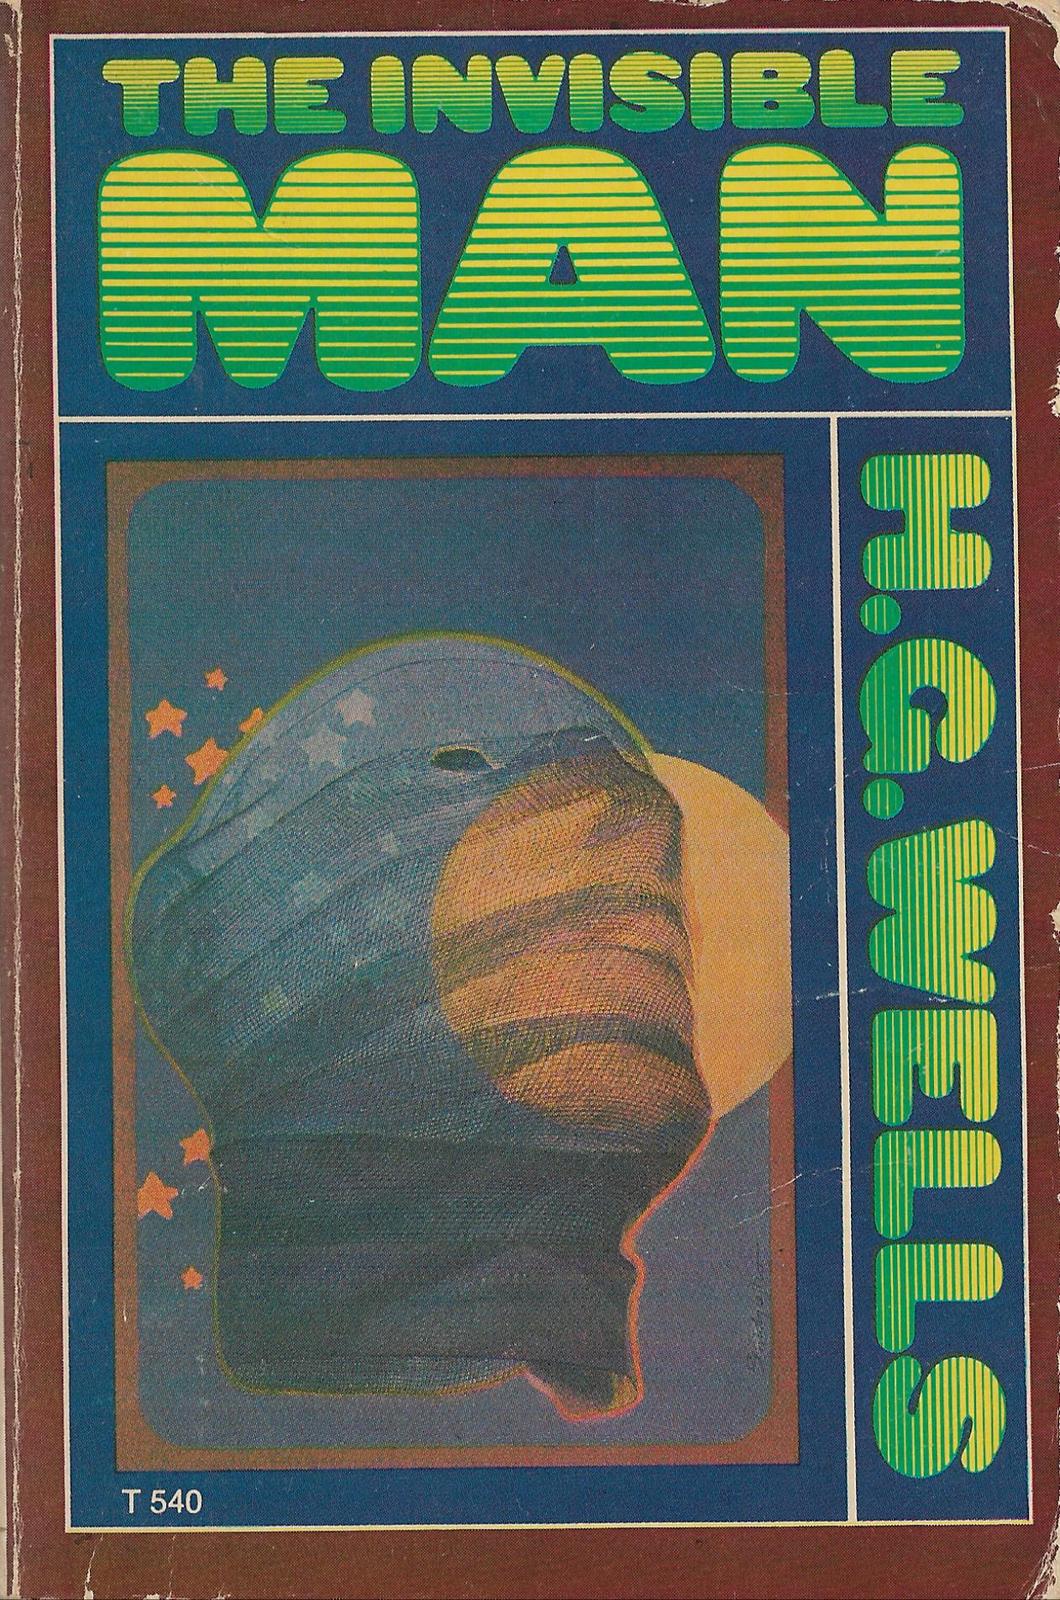 H. G. Wells: The Invisible Man (1975, Scholastic Book Services)